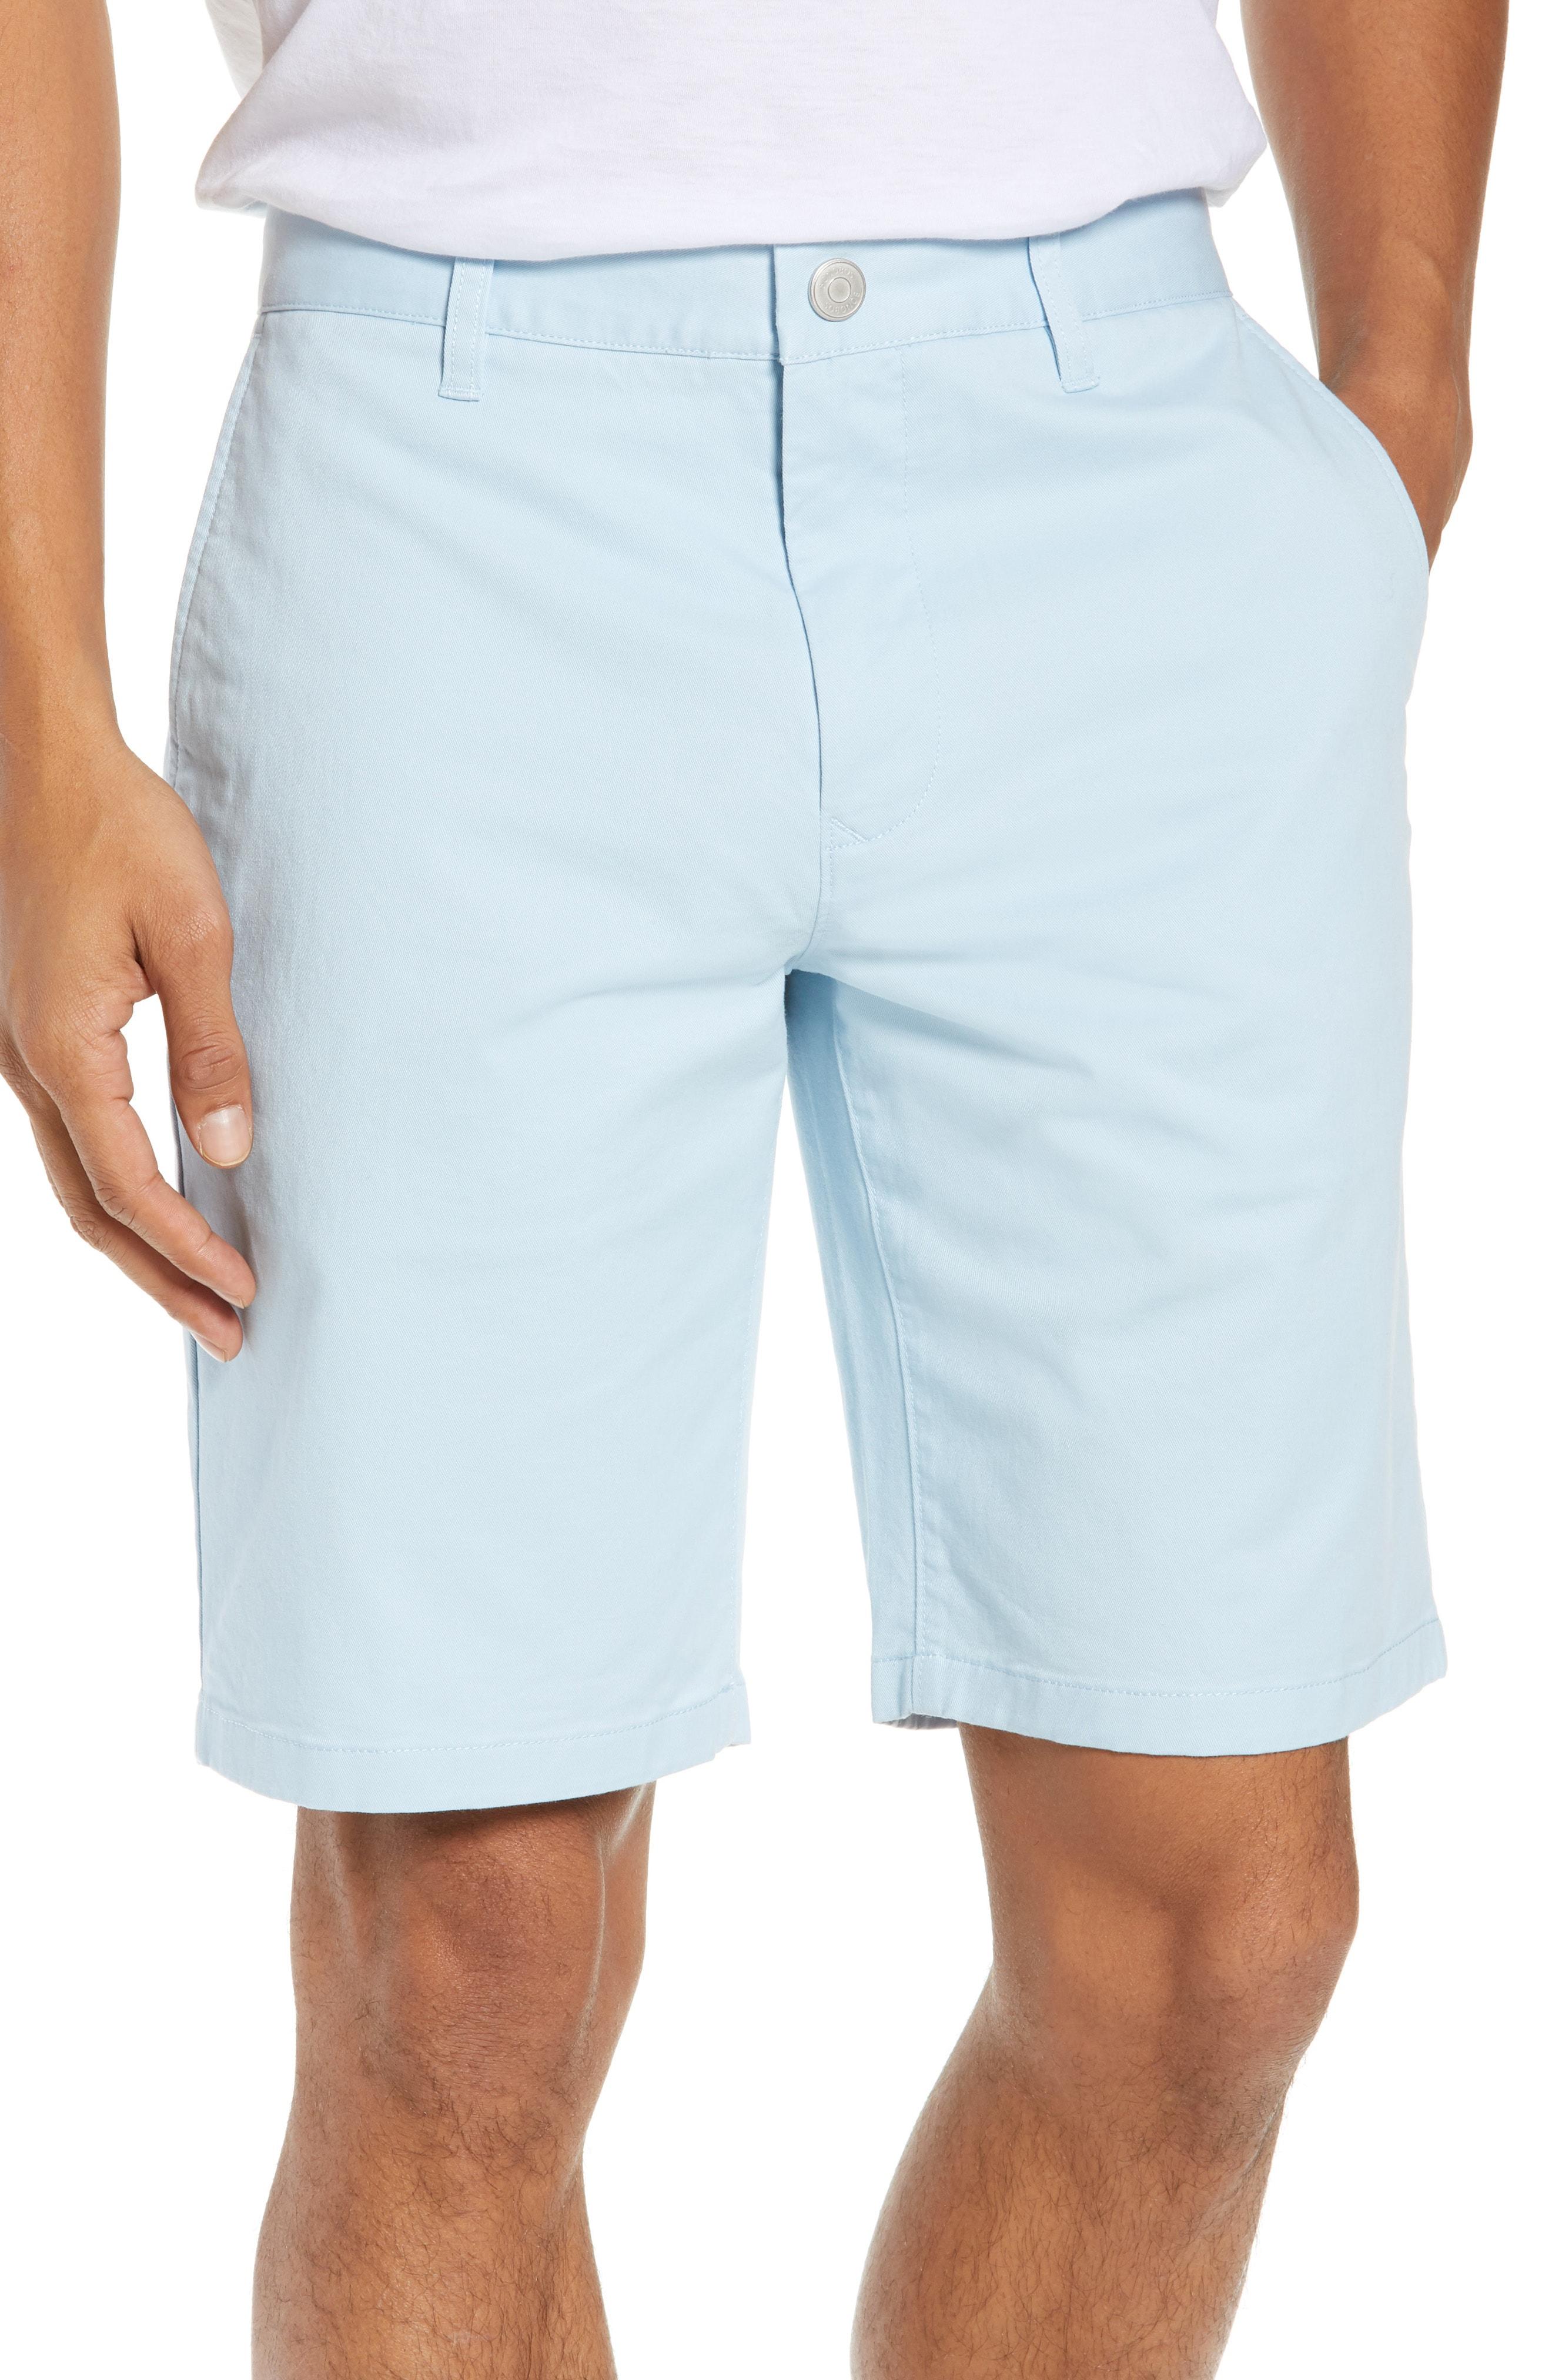 Lyst - Bonobos Stretch Washed Chino 9-inch Shorts in Blue for Men